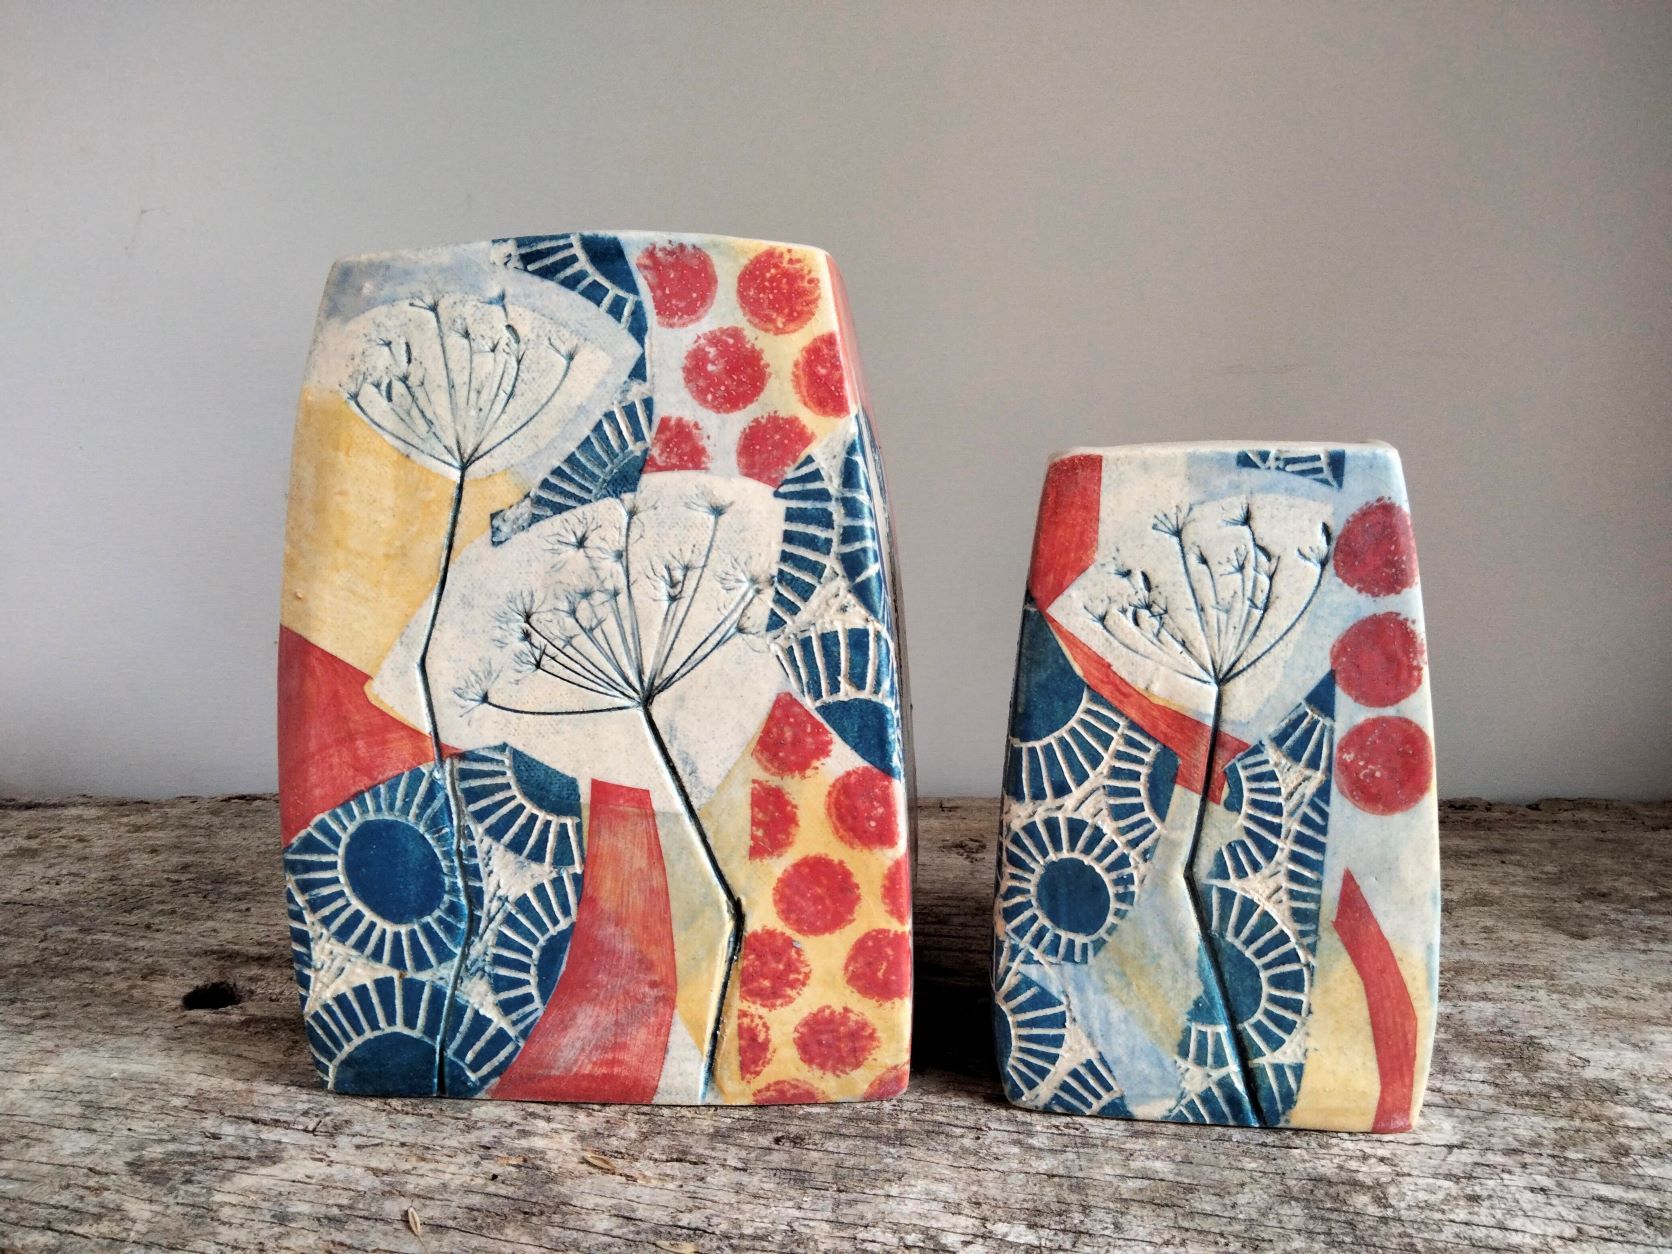 2 red and blue vases